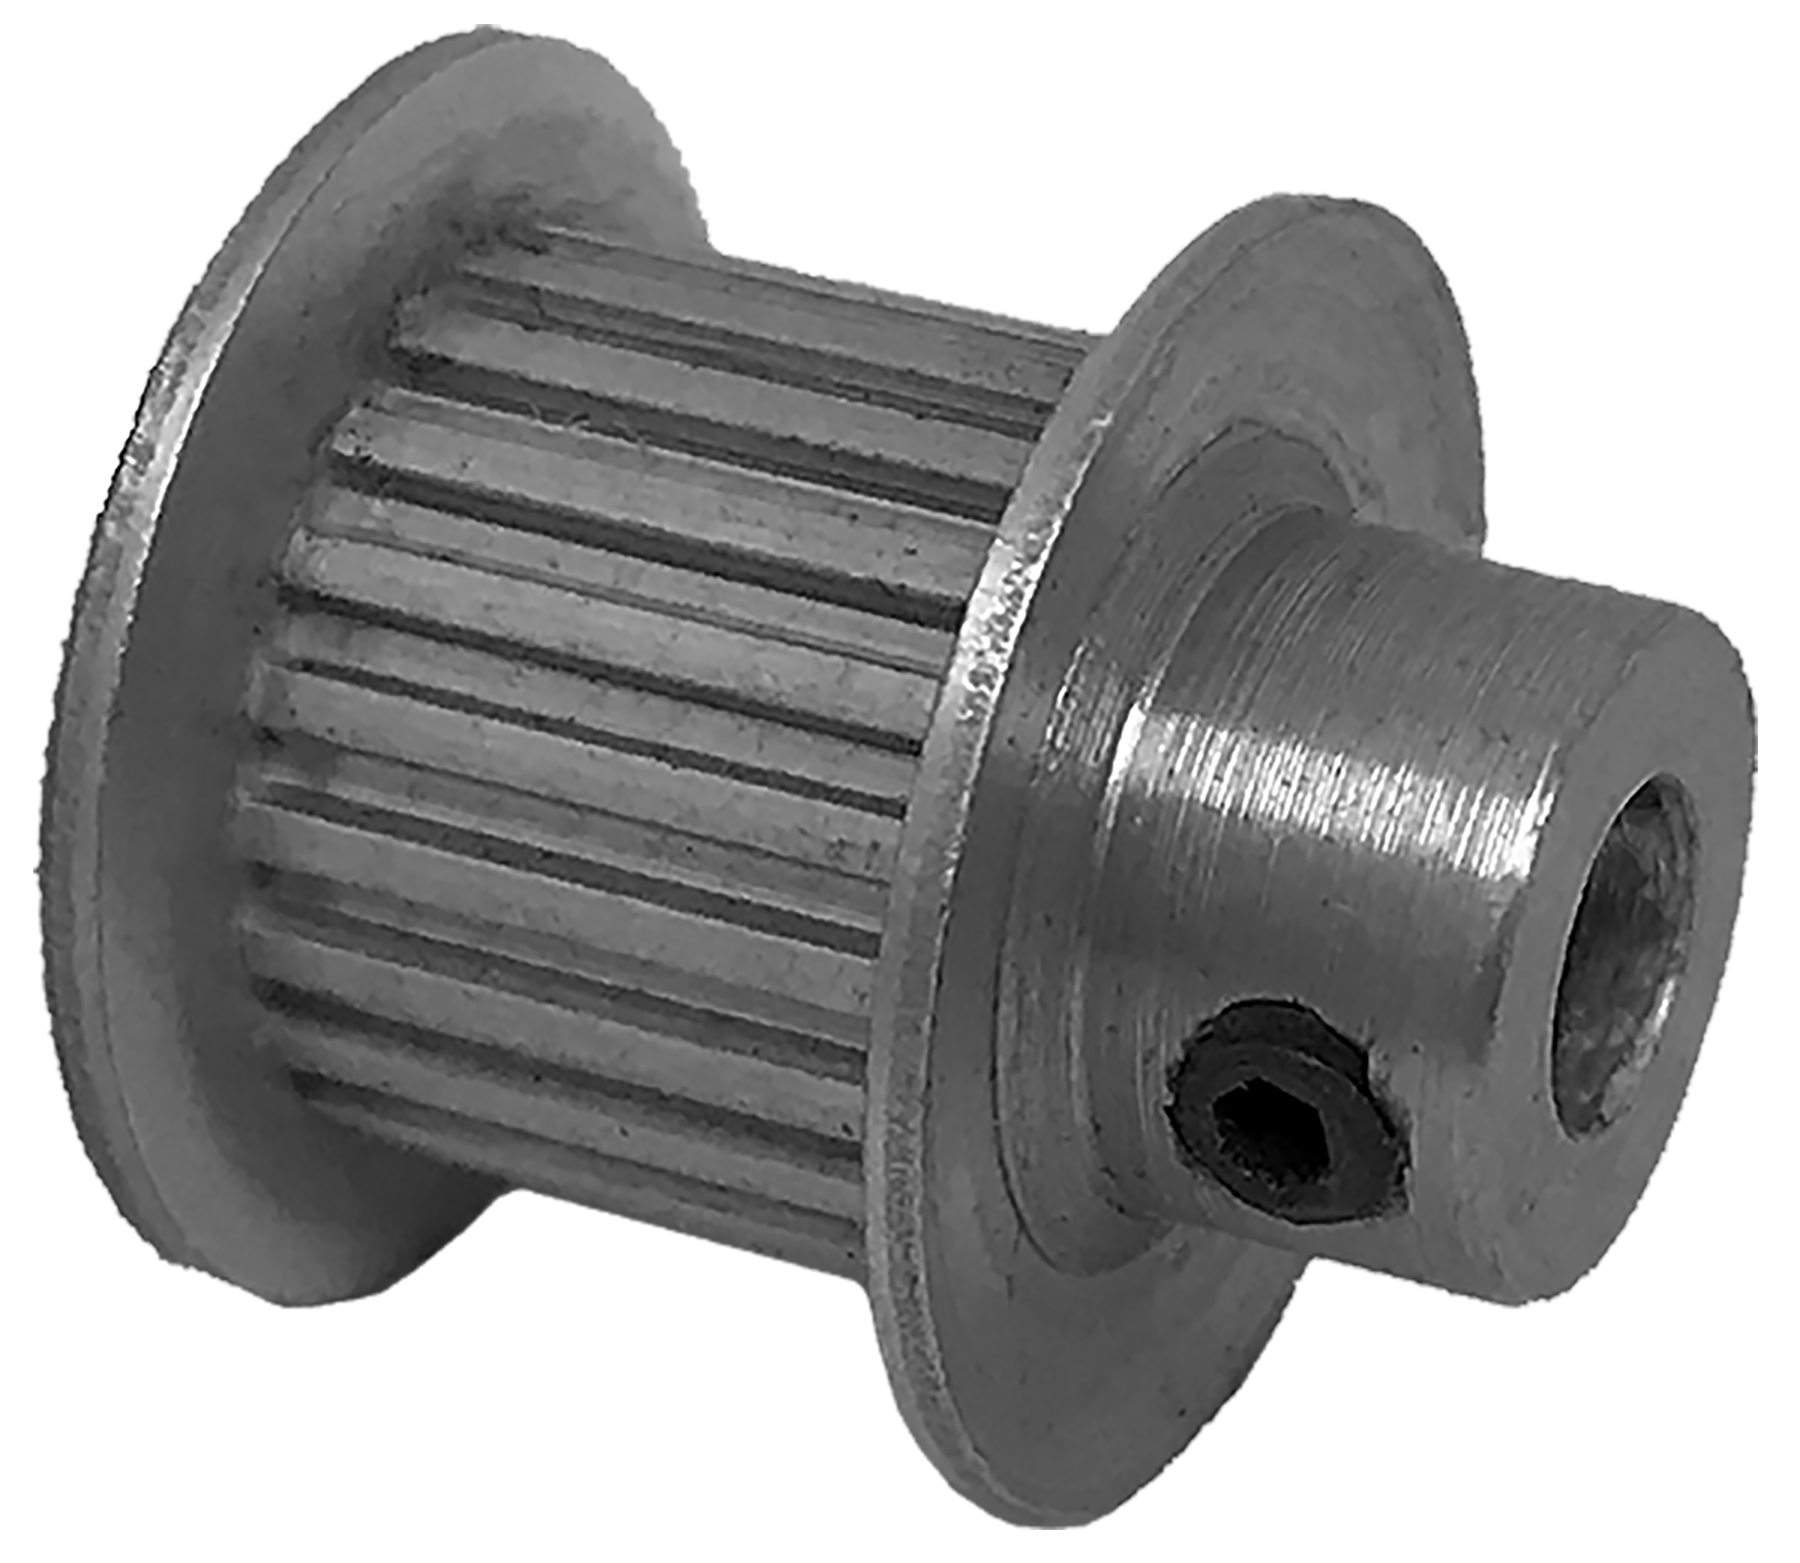 22MP037-6FA2 - Aluminum Imperial Pitch Pulleys